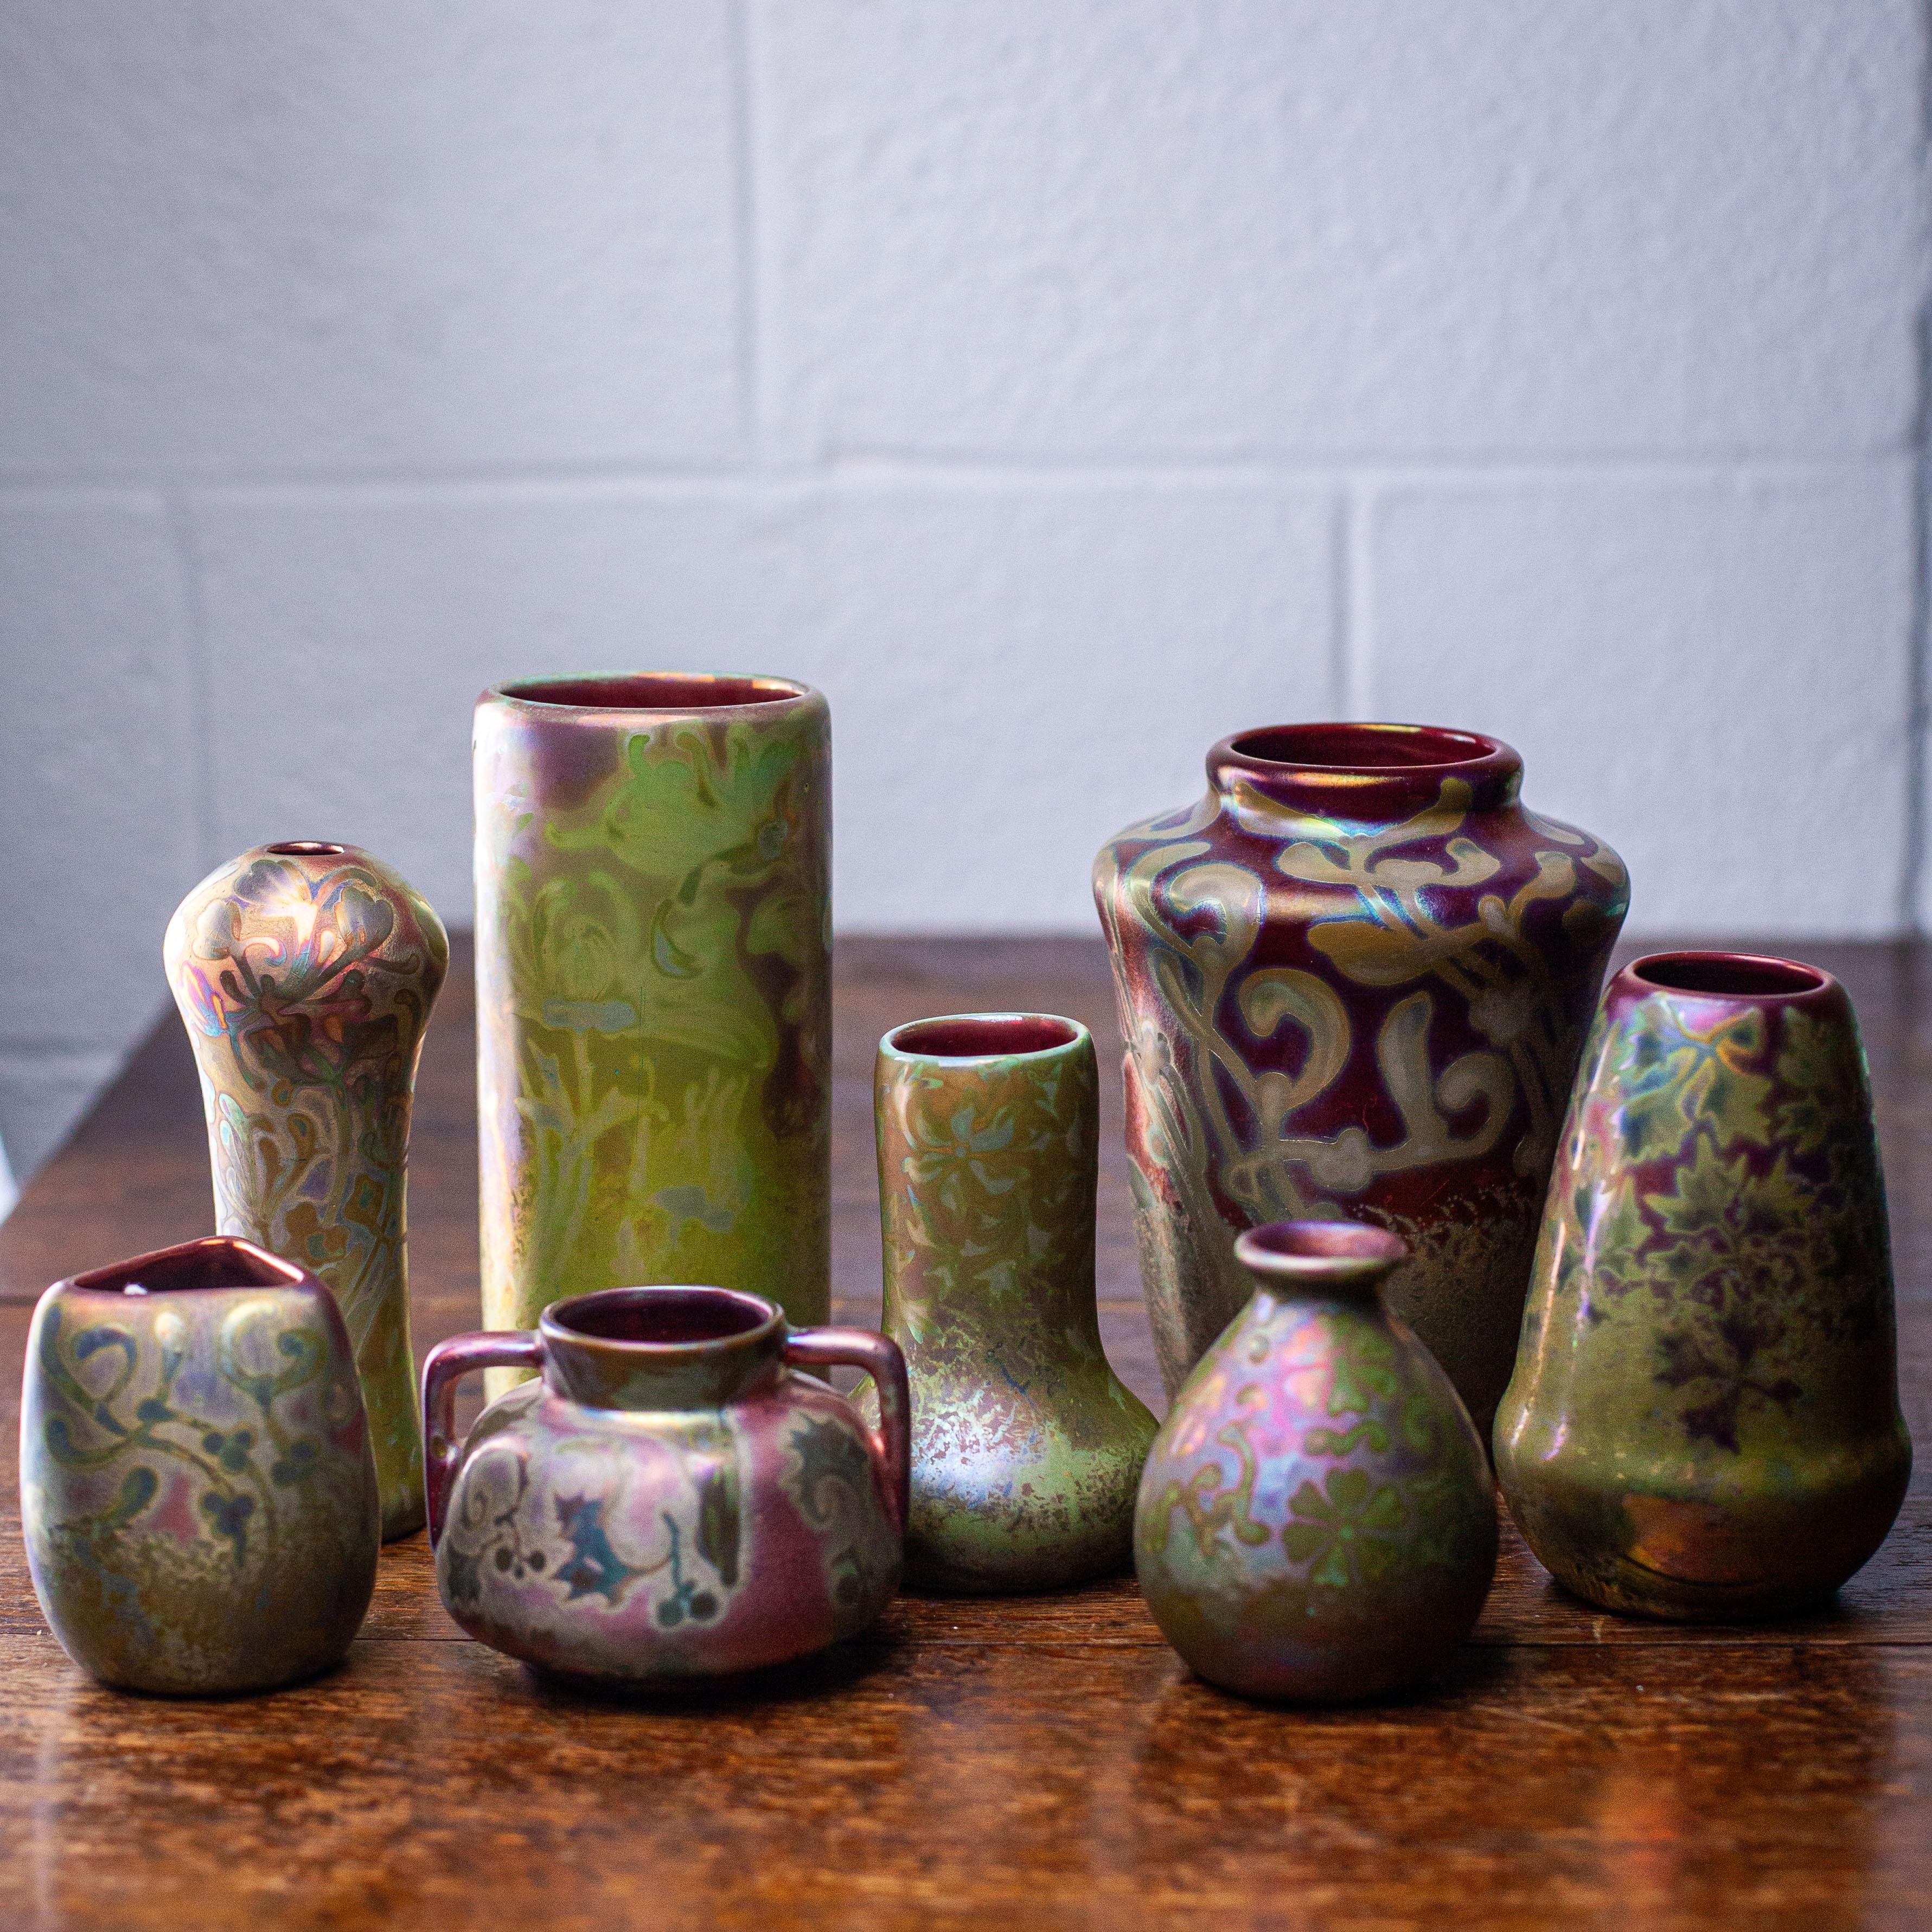 A collection of Weller Sicard vessels is being offered by fleurdetroit. These fantastical forms with amazing scared decoration are becoming harder to obtain as time moves forward. Here is an opportunity to purchase a beautiful collection,